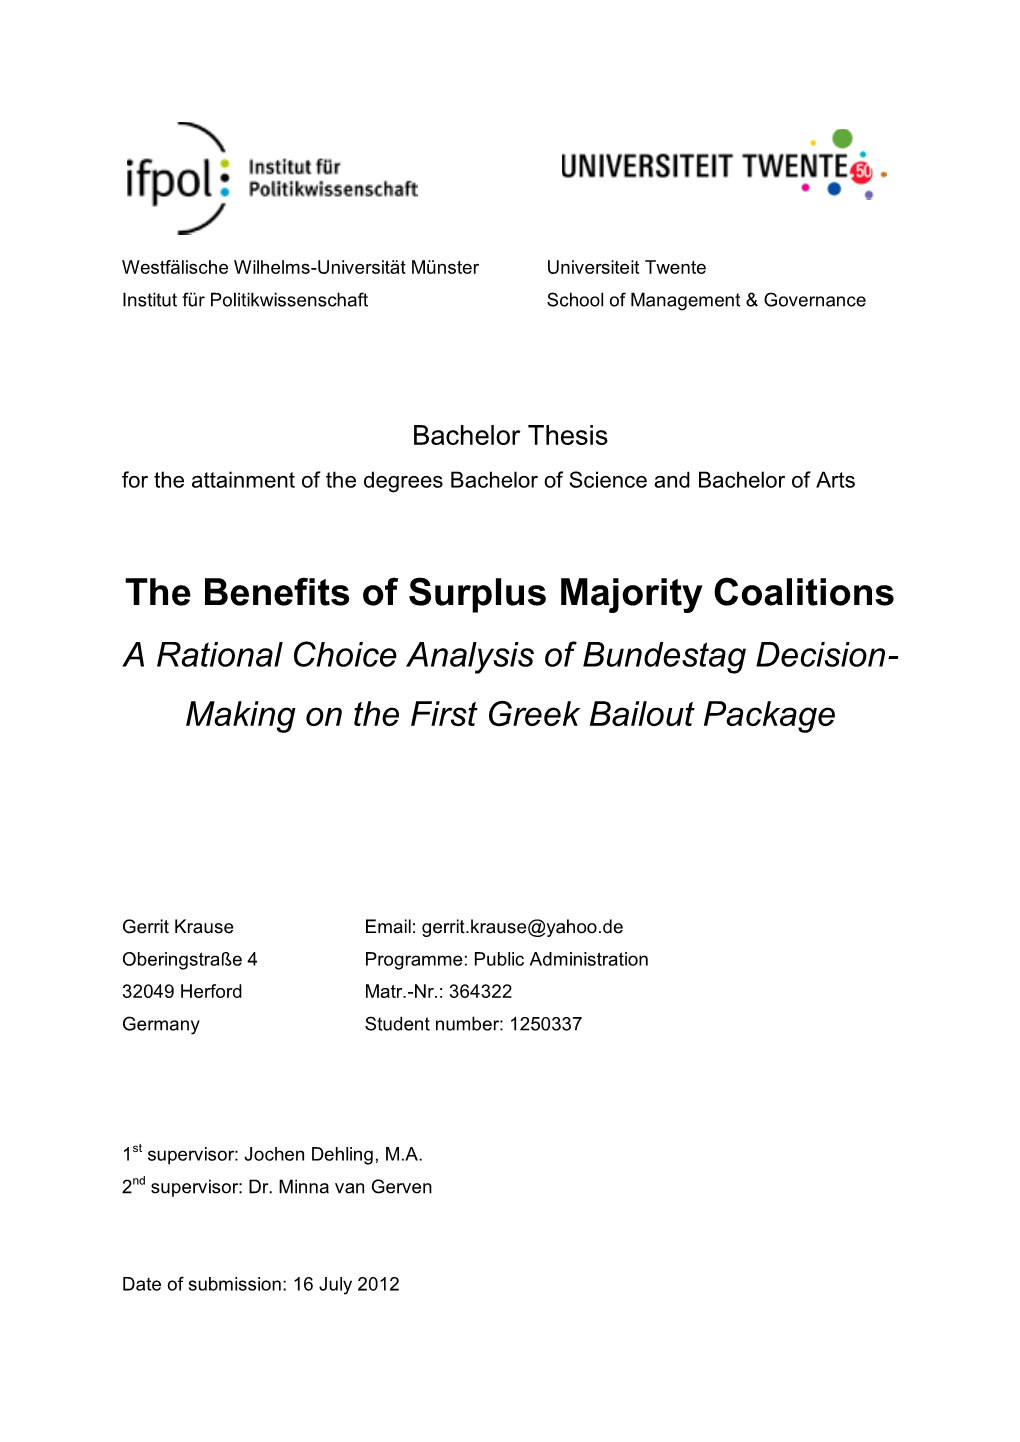 The Benefits of Surplus Majority Coalitions a Rational Choice Analysis of Bundestag Decision- Making on the First Greek Bailout Package